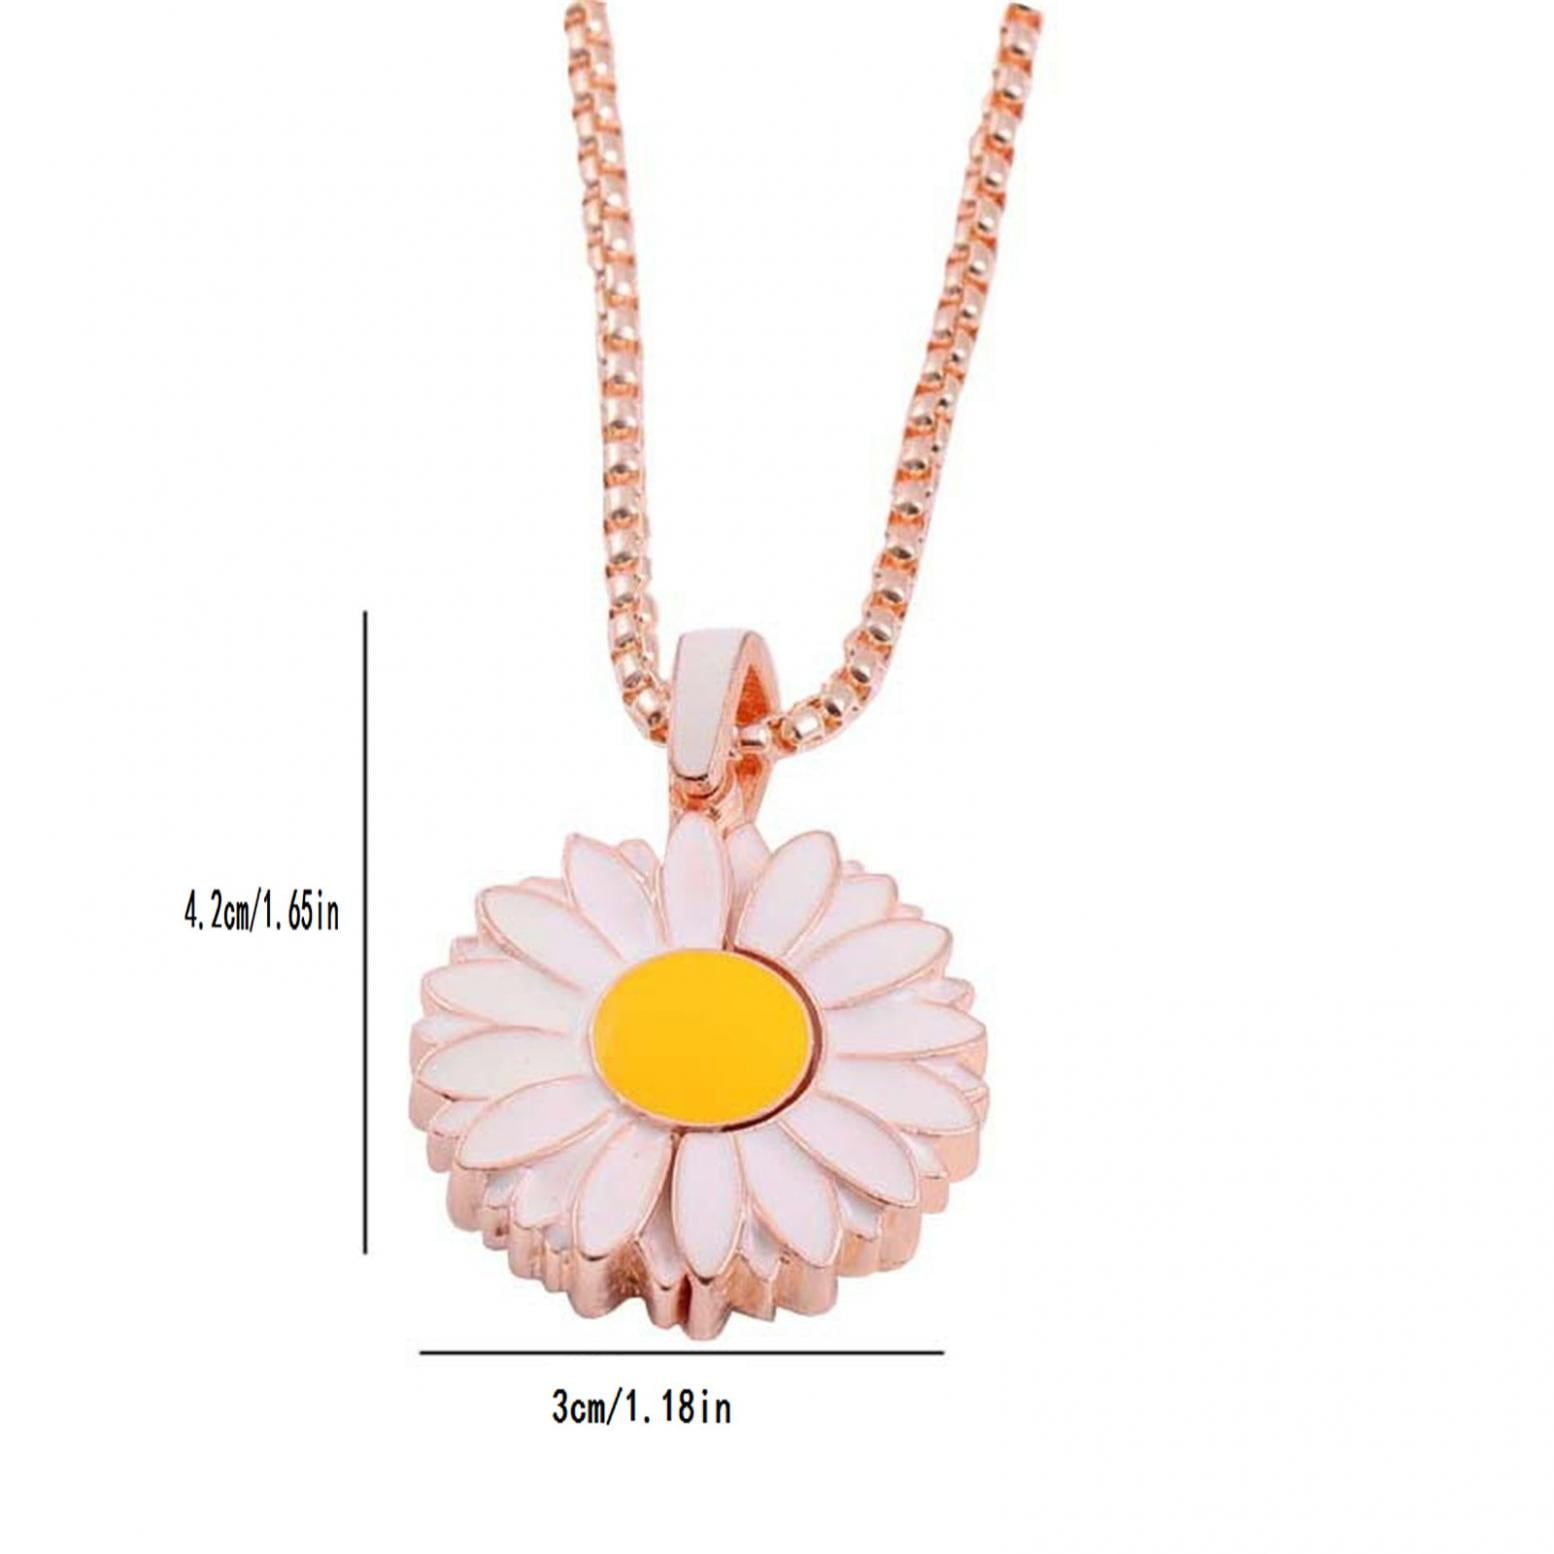 SUNNYCLUE 1 Box 40Pcs 10 Styles Flower Charms Bulk Colorful Enamel Floral  Pendants Alloy Sunflower Daisy Dangle Gold Plated Pendant for Jewelry  Making